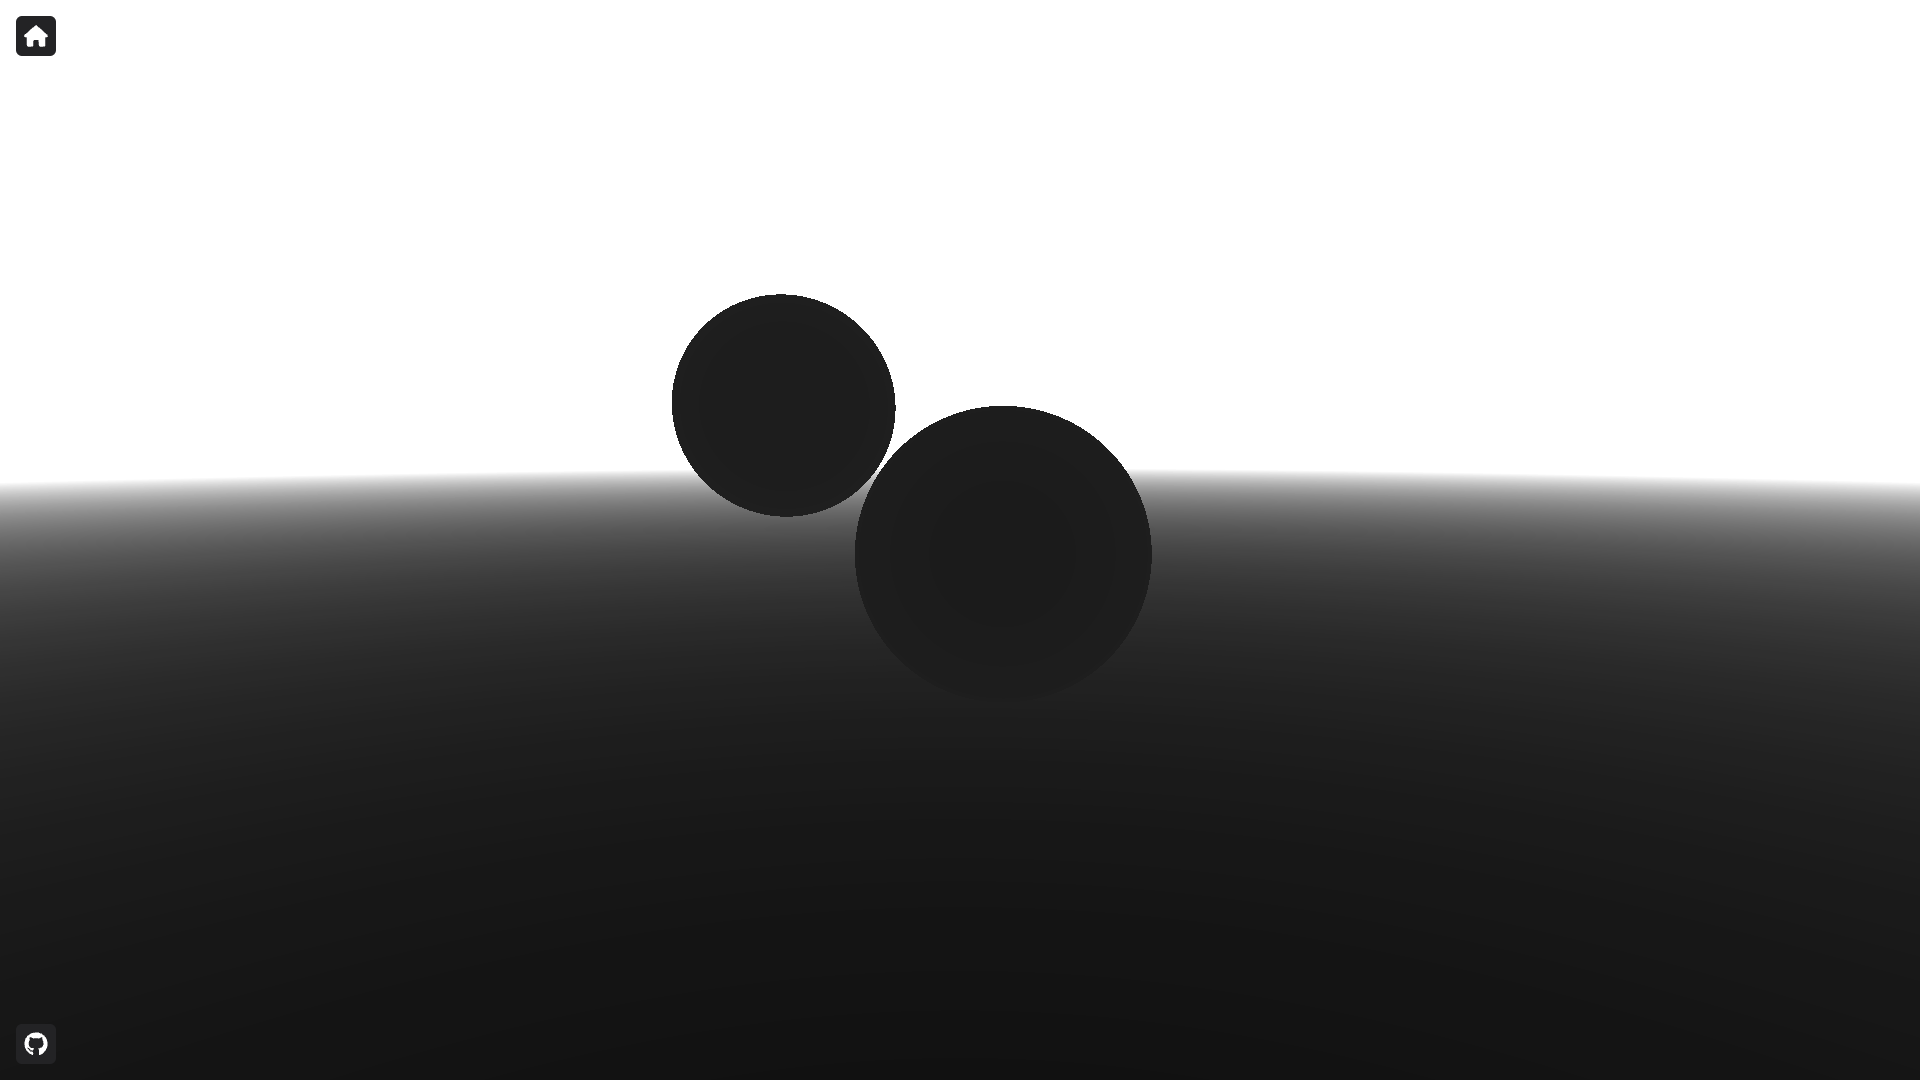 Creating a ray-marching renderer in Three.js